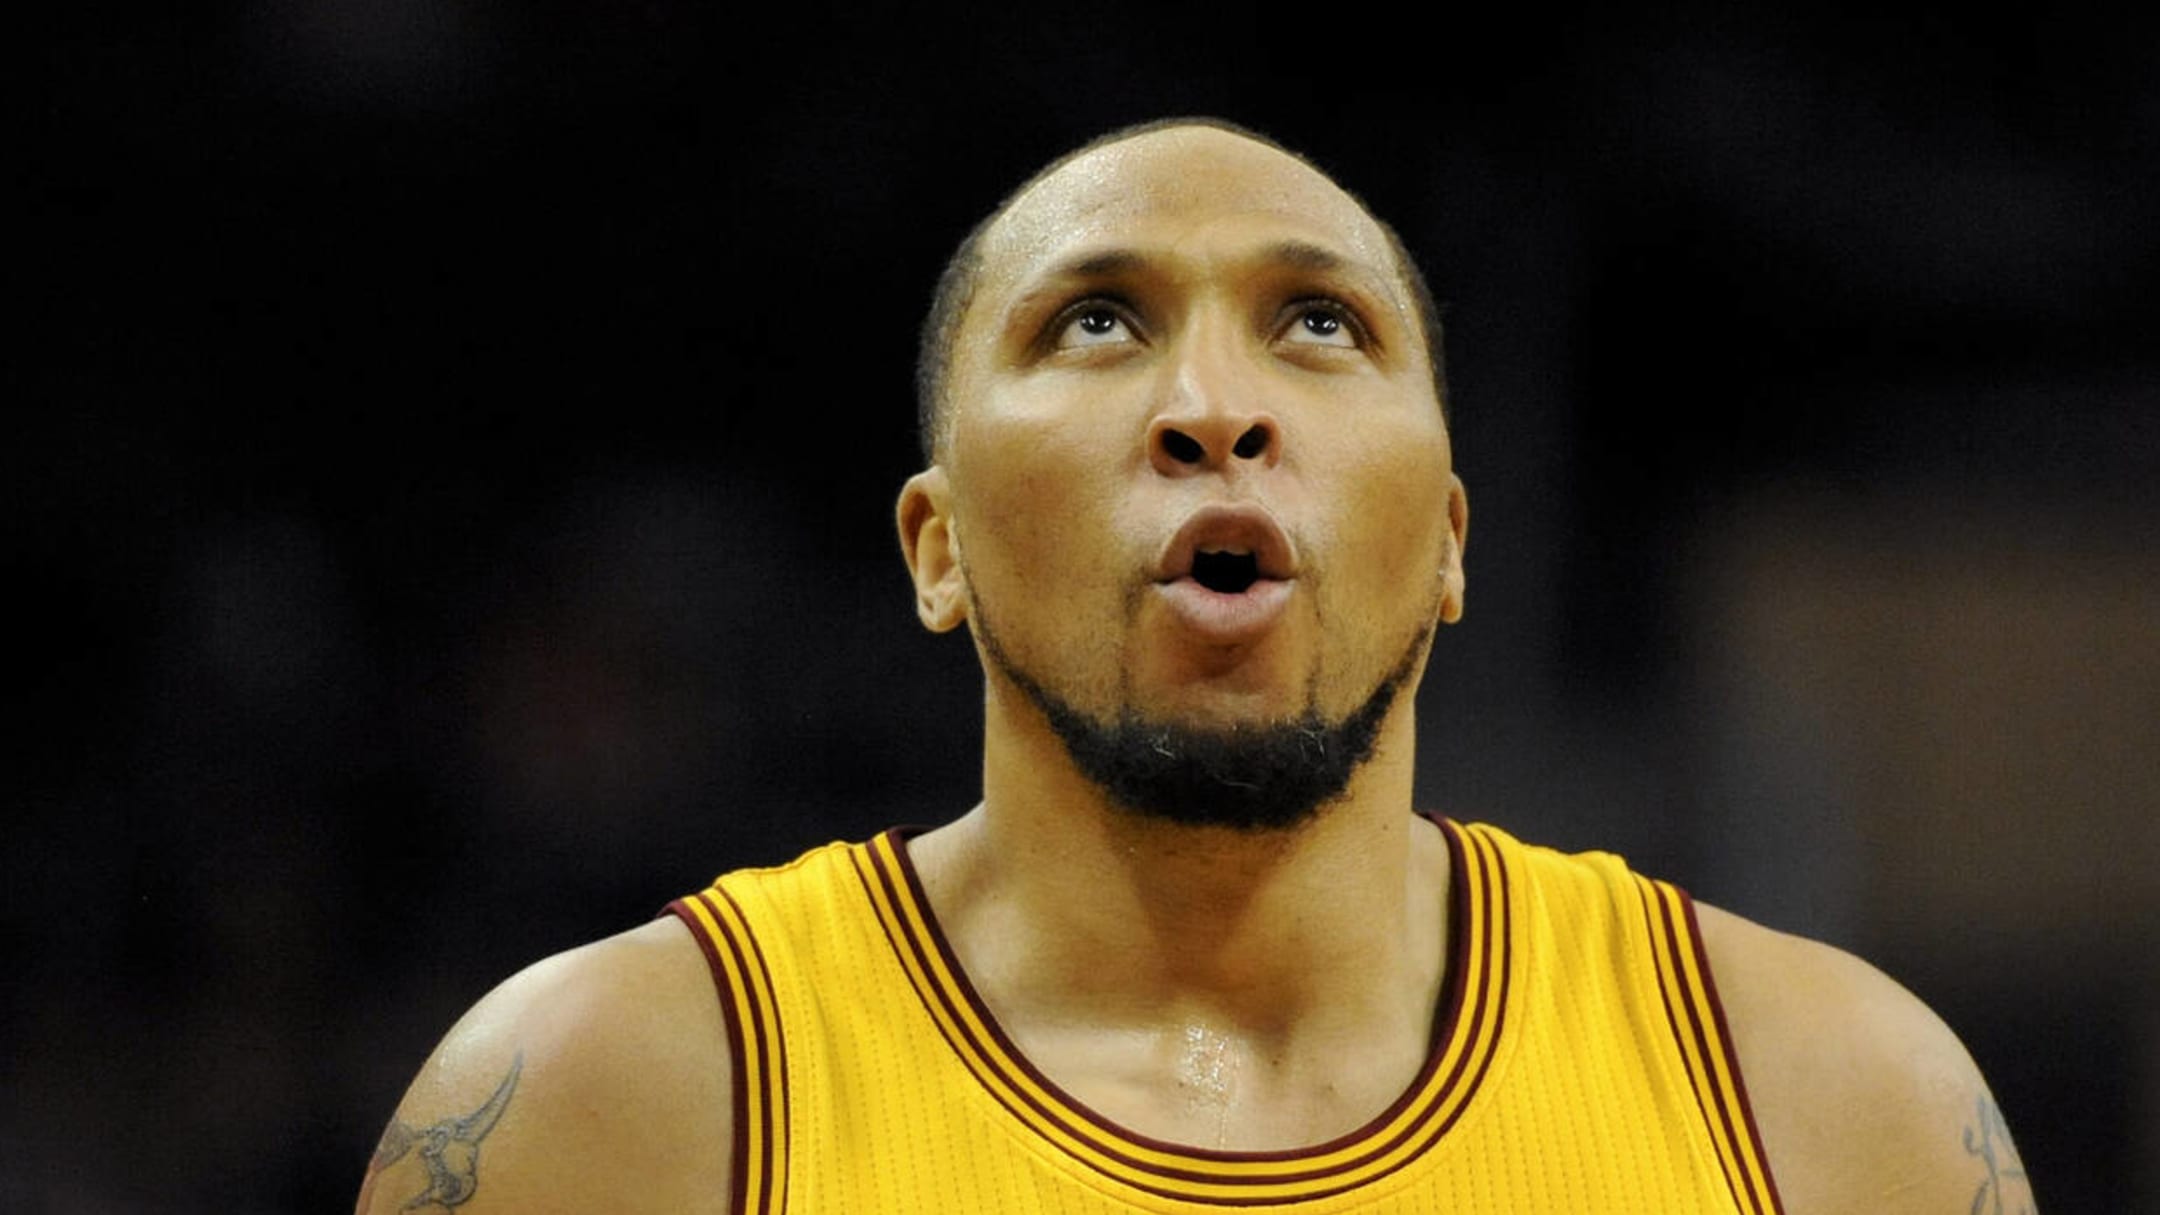 Suns to retire jerseys of Shawn Marion, Amar'e Stoudemire at Ring